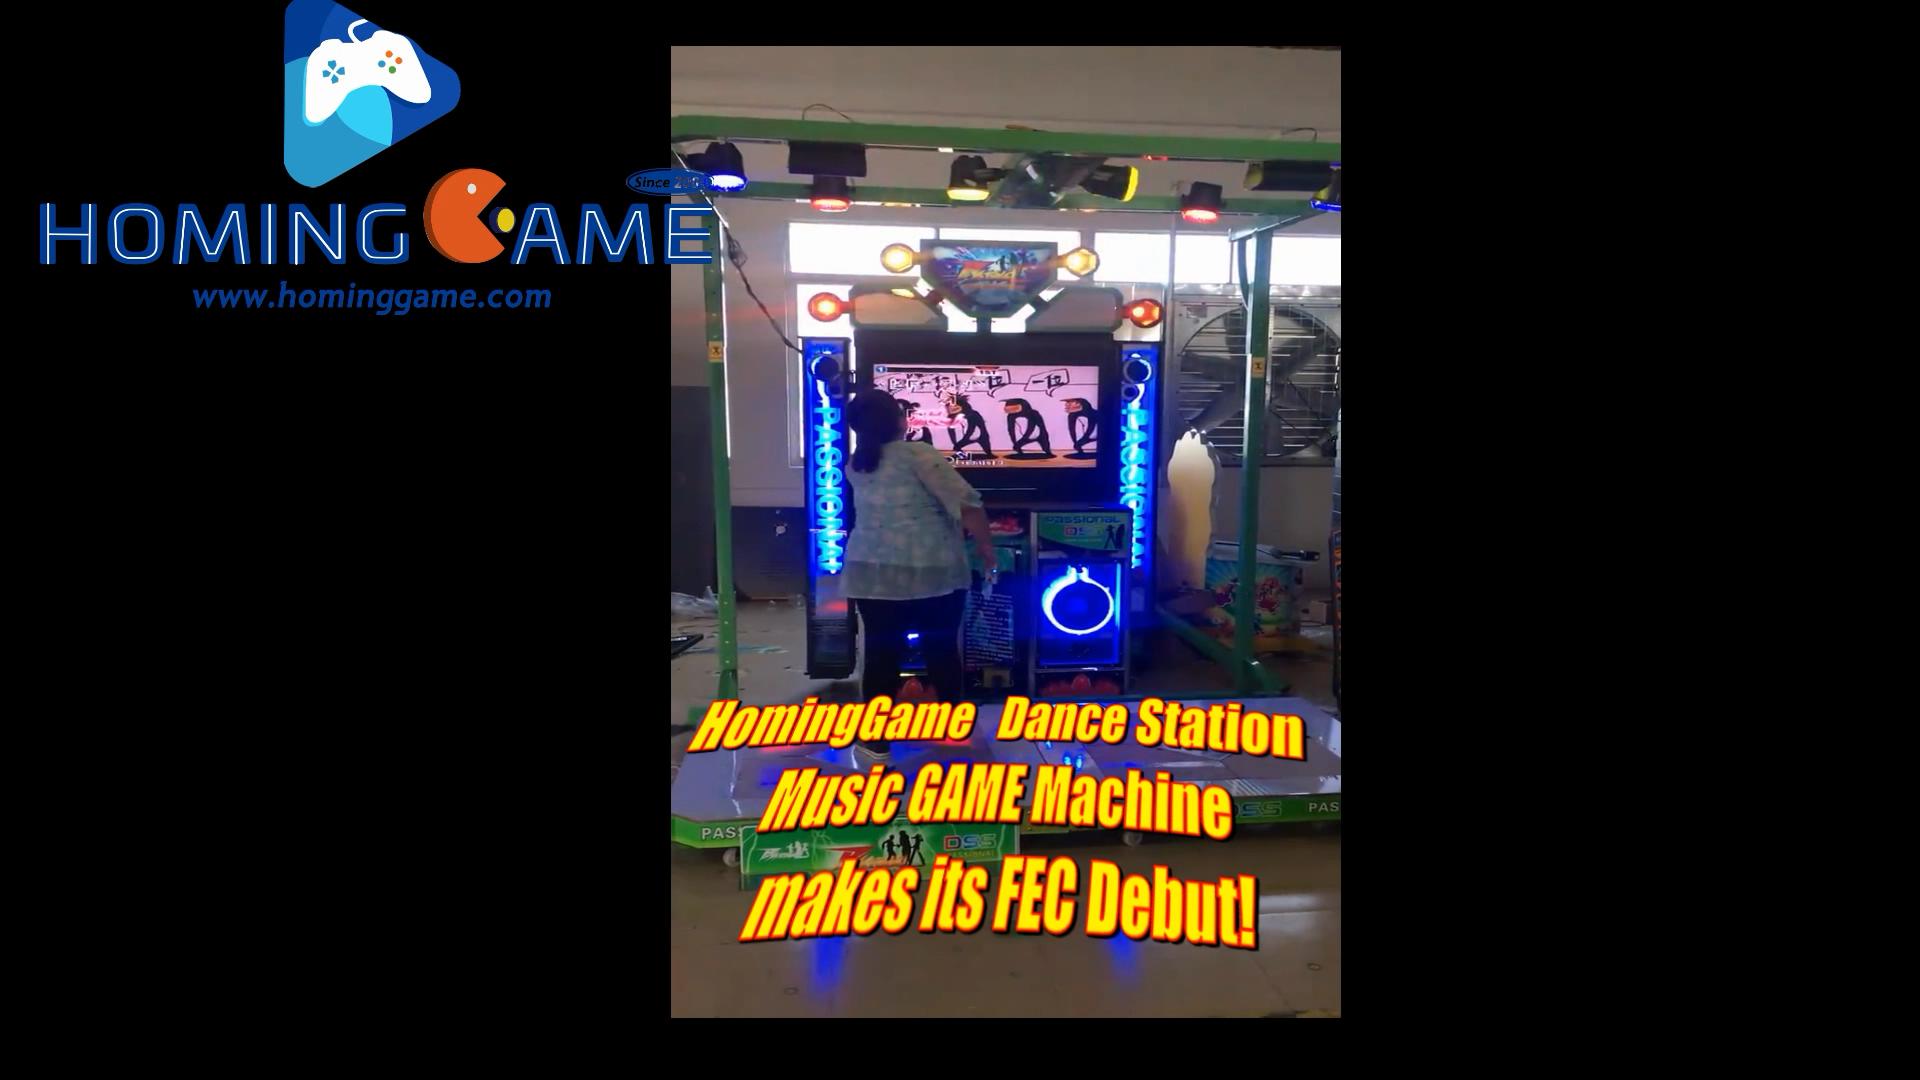 dance station music game machine,coin operated dance station music arcade game machine,super dance station music arcade game machine,pump it up,pump it up dancing game machine,dancing game,pump it up game,dance pump it up,pump it up music game machine,game machine,arcade game machine,coin operated game machine,amusement park game machine,entertainment game machine,family entertainment,indoor game machine,sports game,hominggame,www.hominggame.com,gametube.hk,www.gametube.hk,entertainment game,indoor entertainment game machine,amusement machine,dance amusement park game equipment,coin operated dance arcade game machine,coin operated dance station arcade game machine